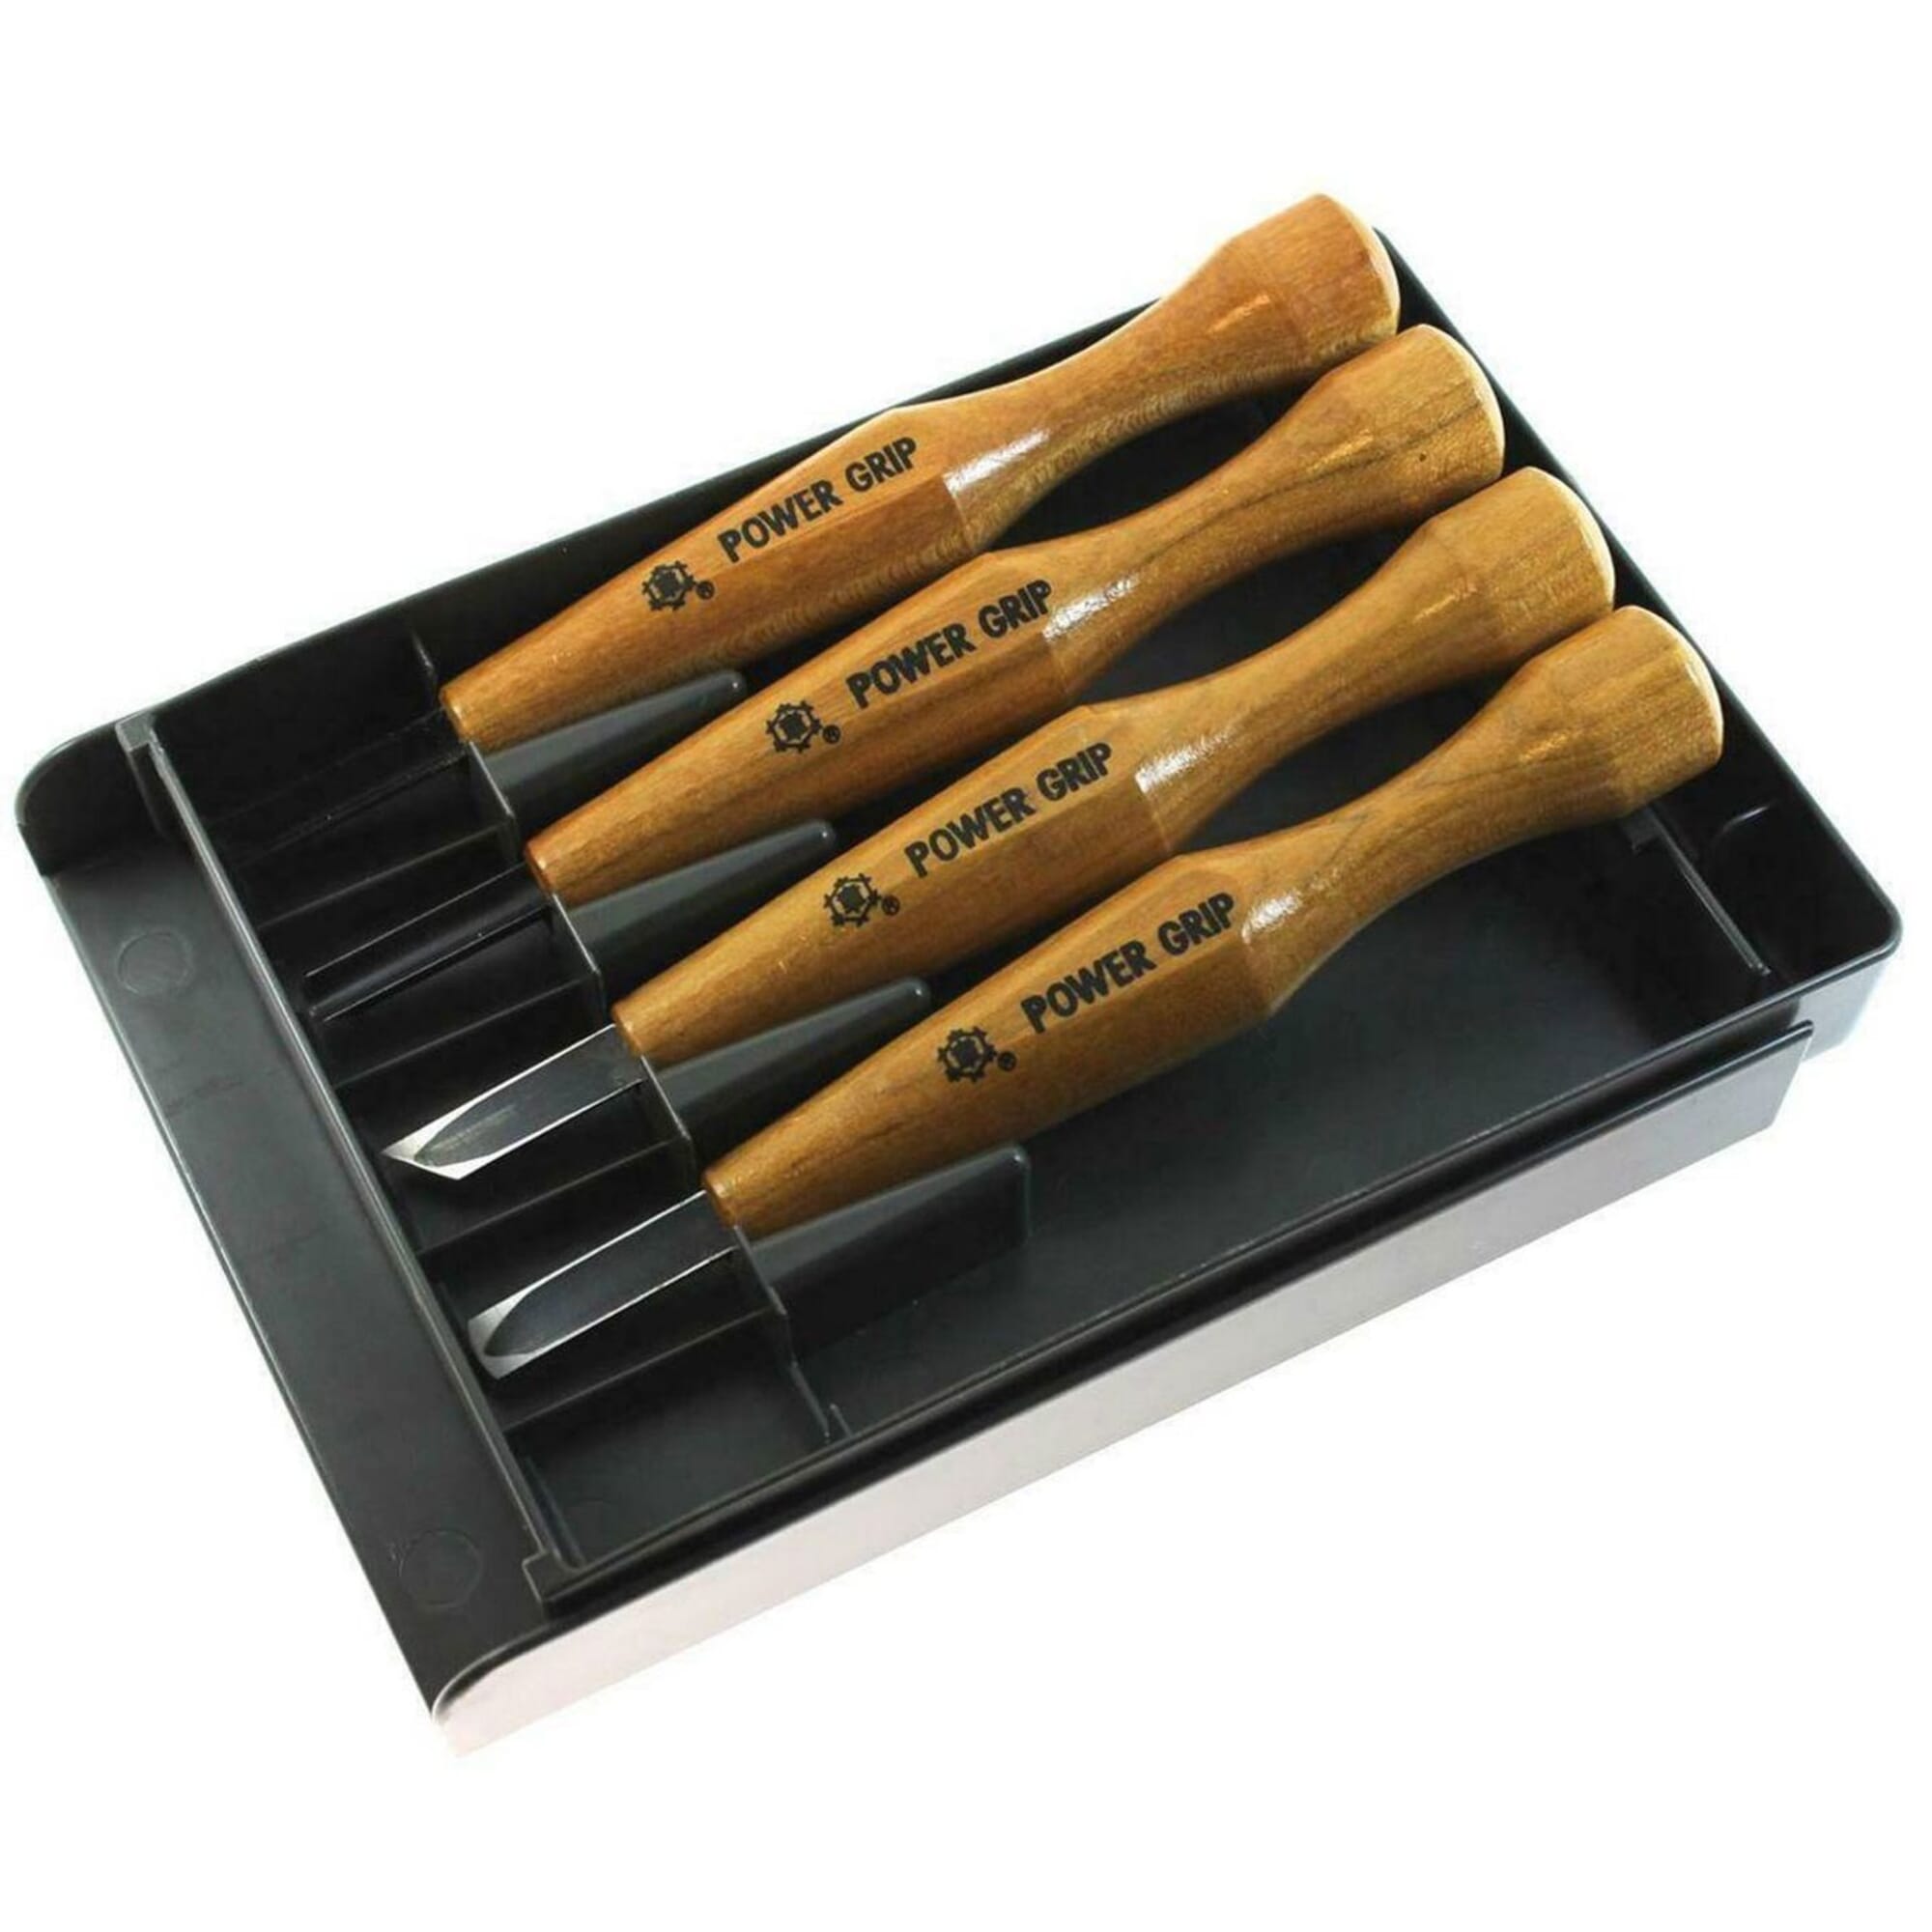 https://goodsjapan.sirv.com/item/images/20156/full/Mikisyo-4pcs-Power-Grip-Wood-Carving-Tool-Kit-U-V-Gouge-Chisel-Set--1-.jpg?scale.width=2000&scale.height=2000